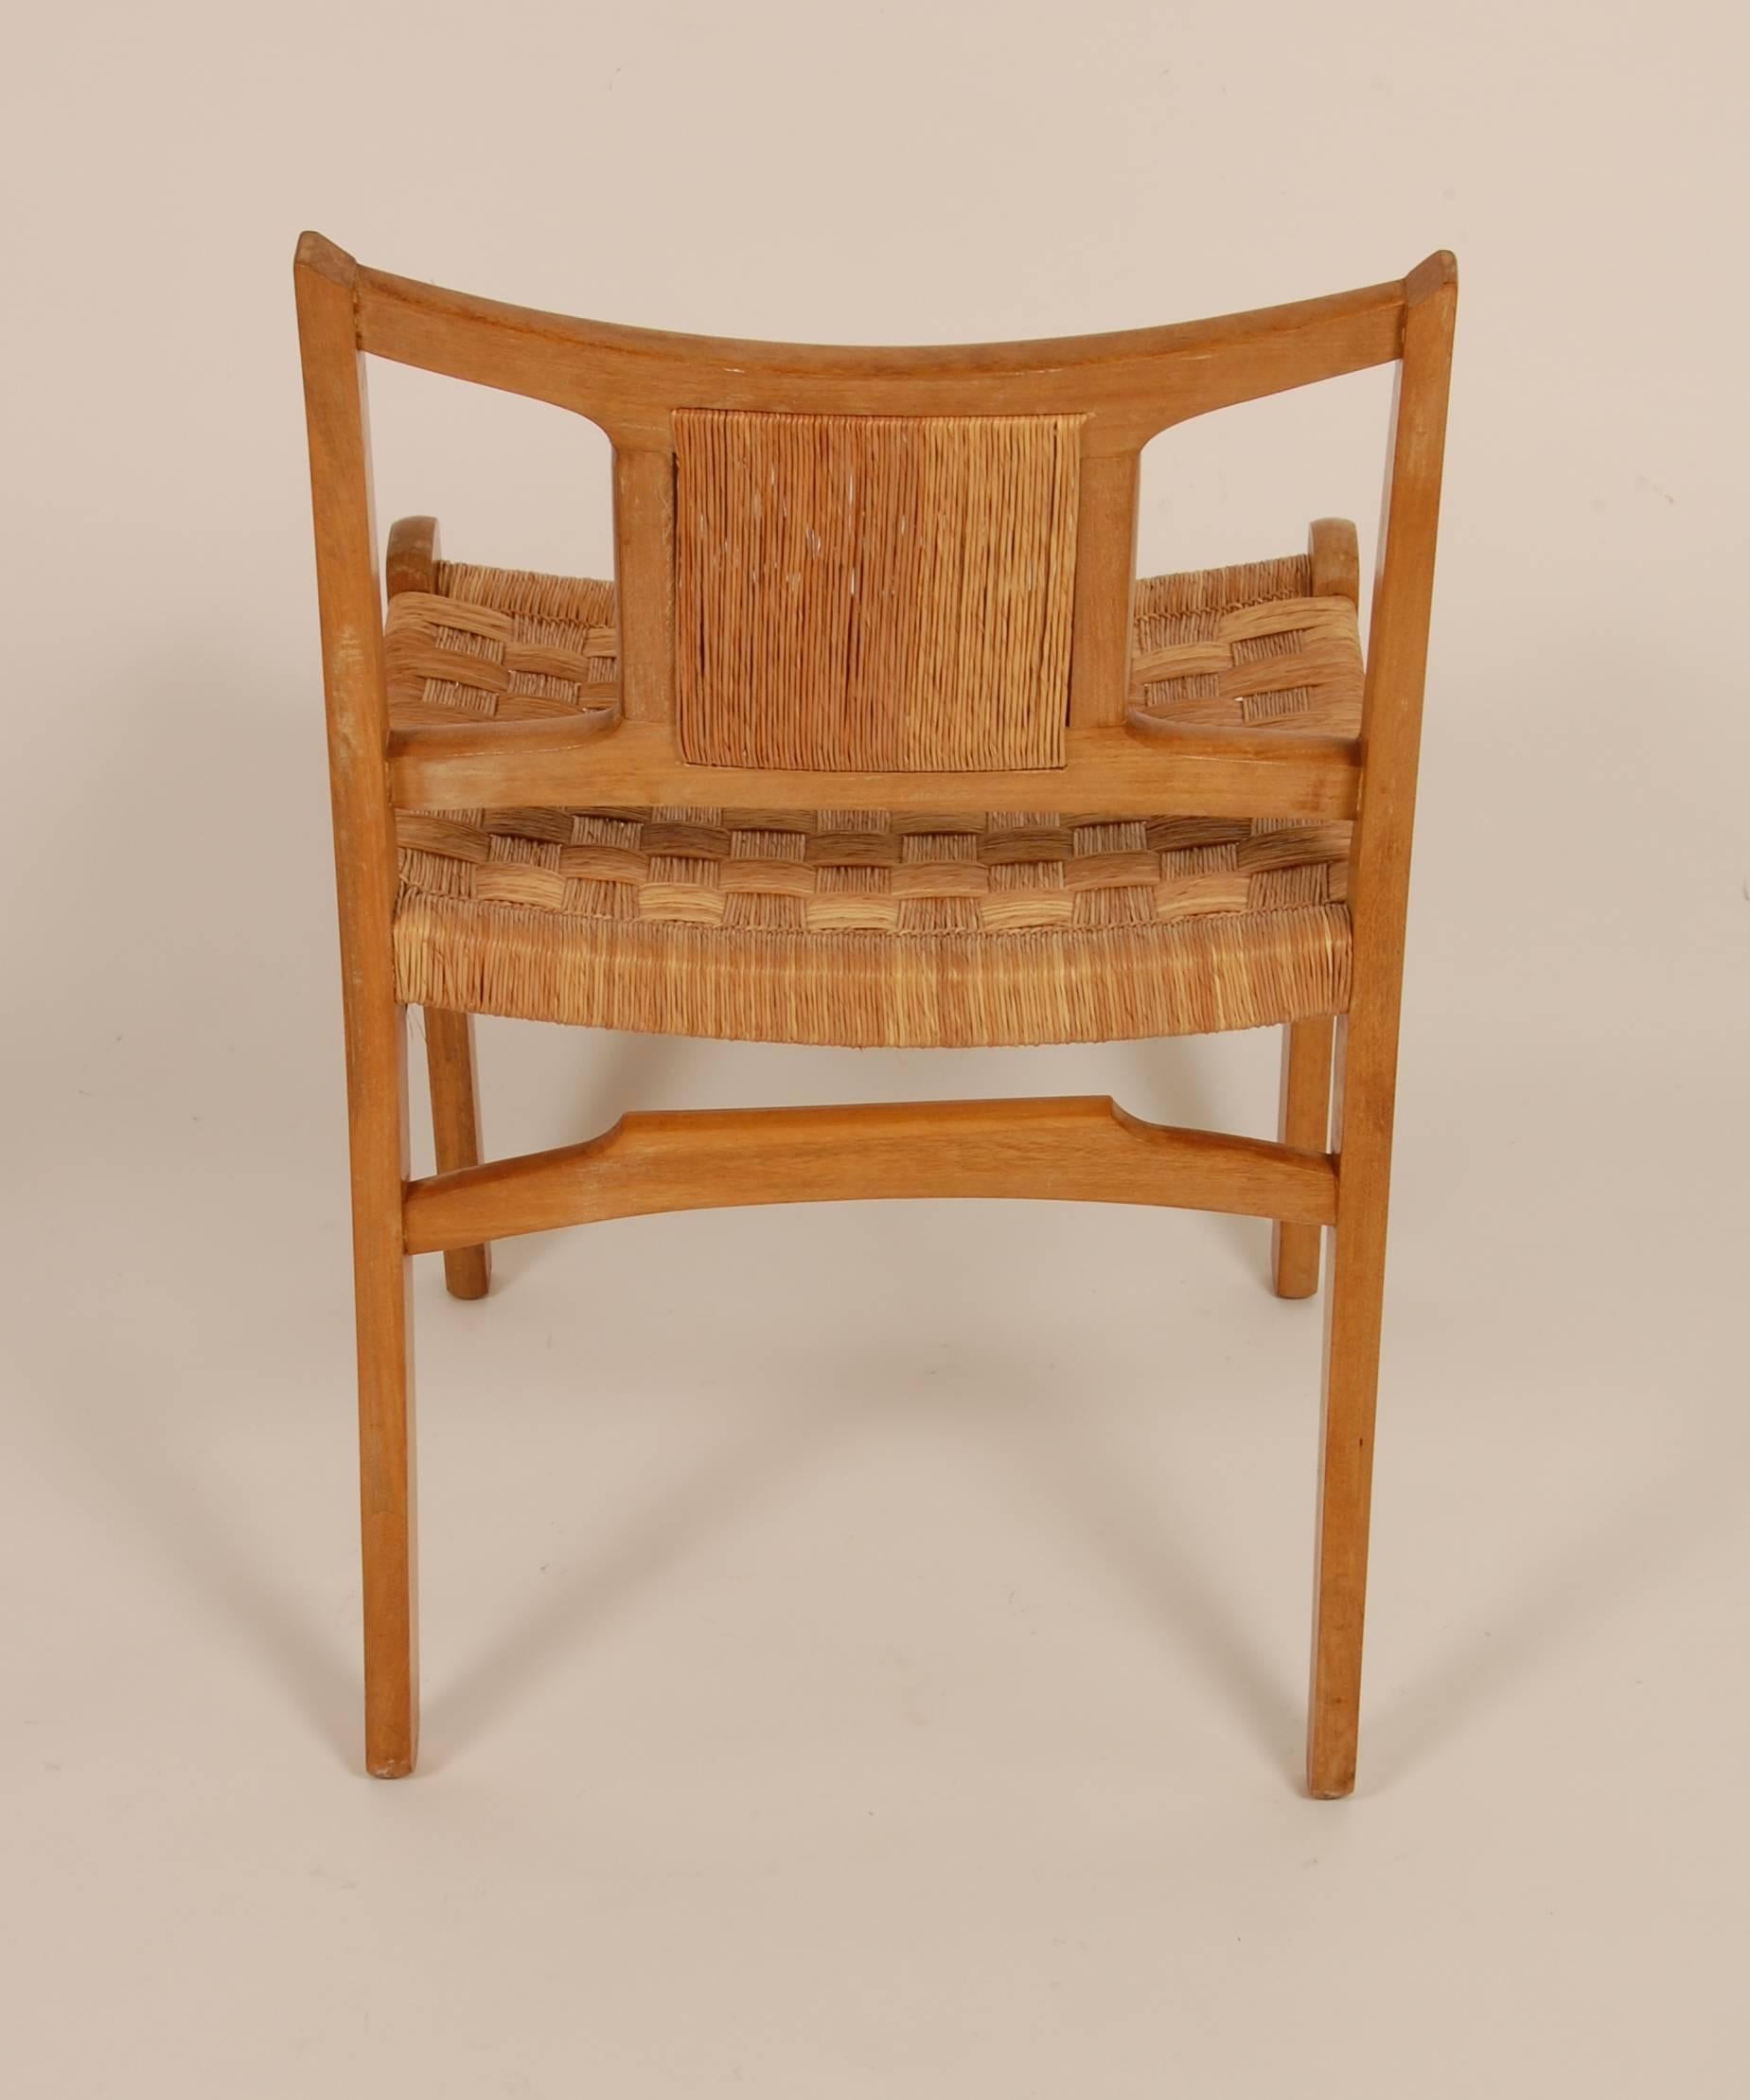 Mexican Edmond Spence Side Chair for Industria Mueblera of Mexico